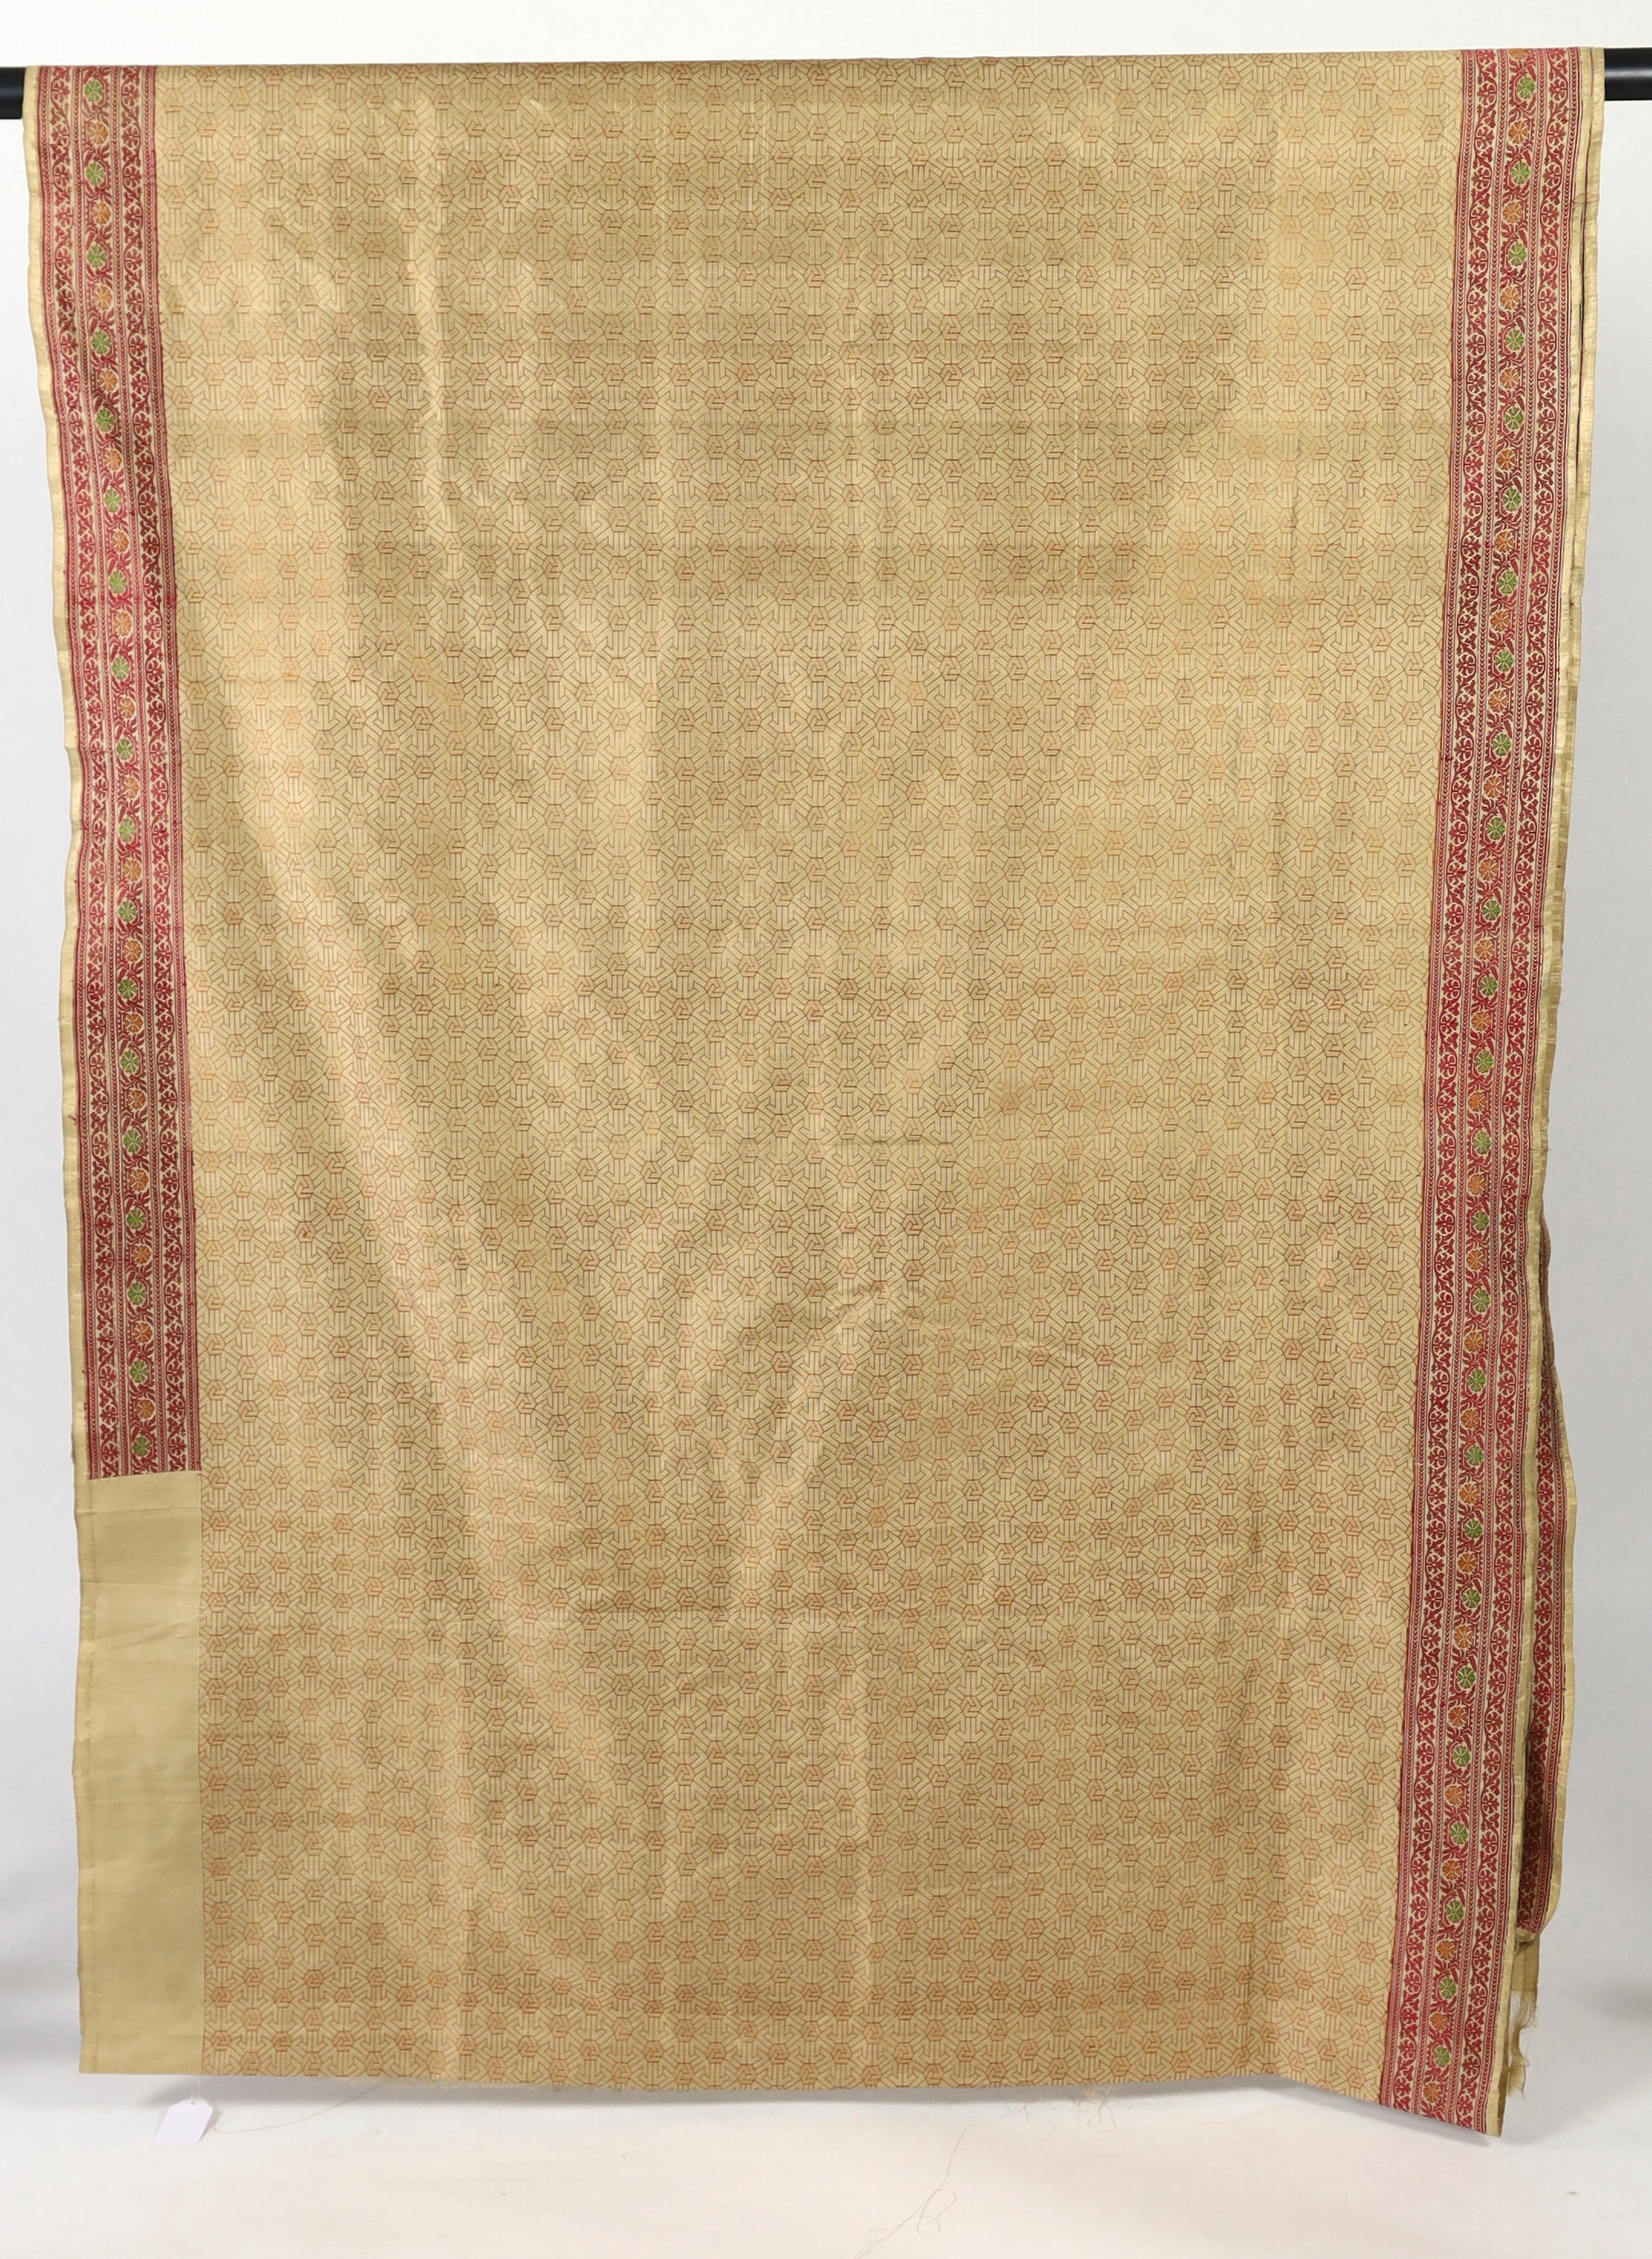 An Indian Varansi, 1980’s, hand woven silk sari by Mohammad Jafar Ali, woven in traditional style as a wedding sari, unused, 620cm long, 115cm wide, comes with provenance